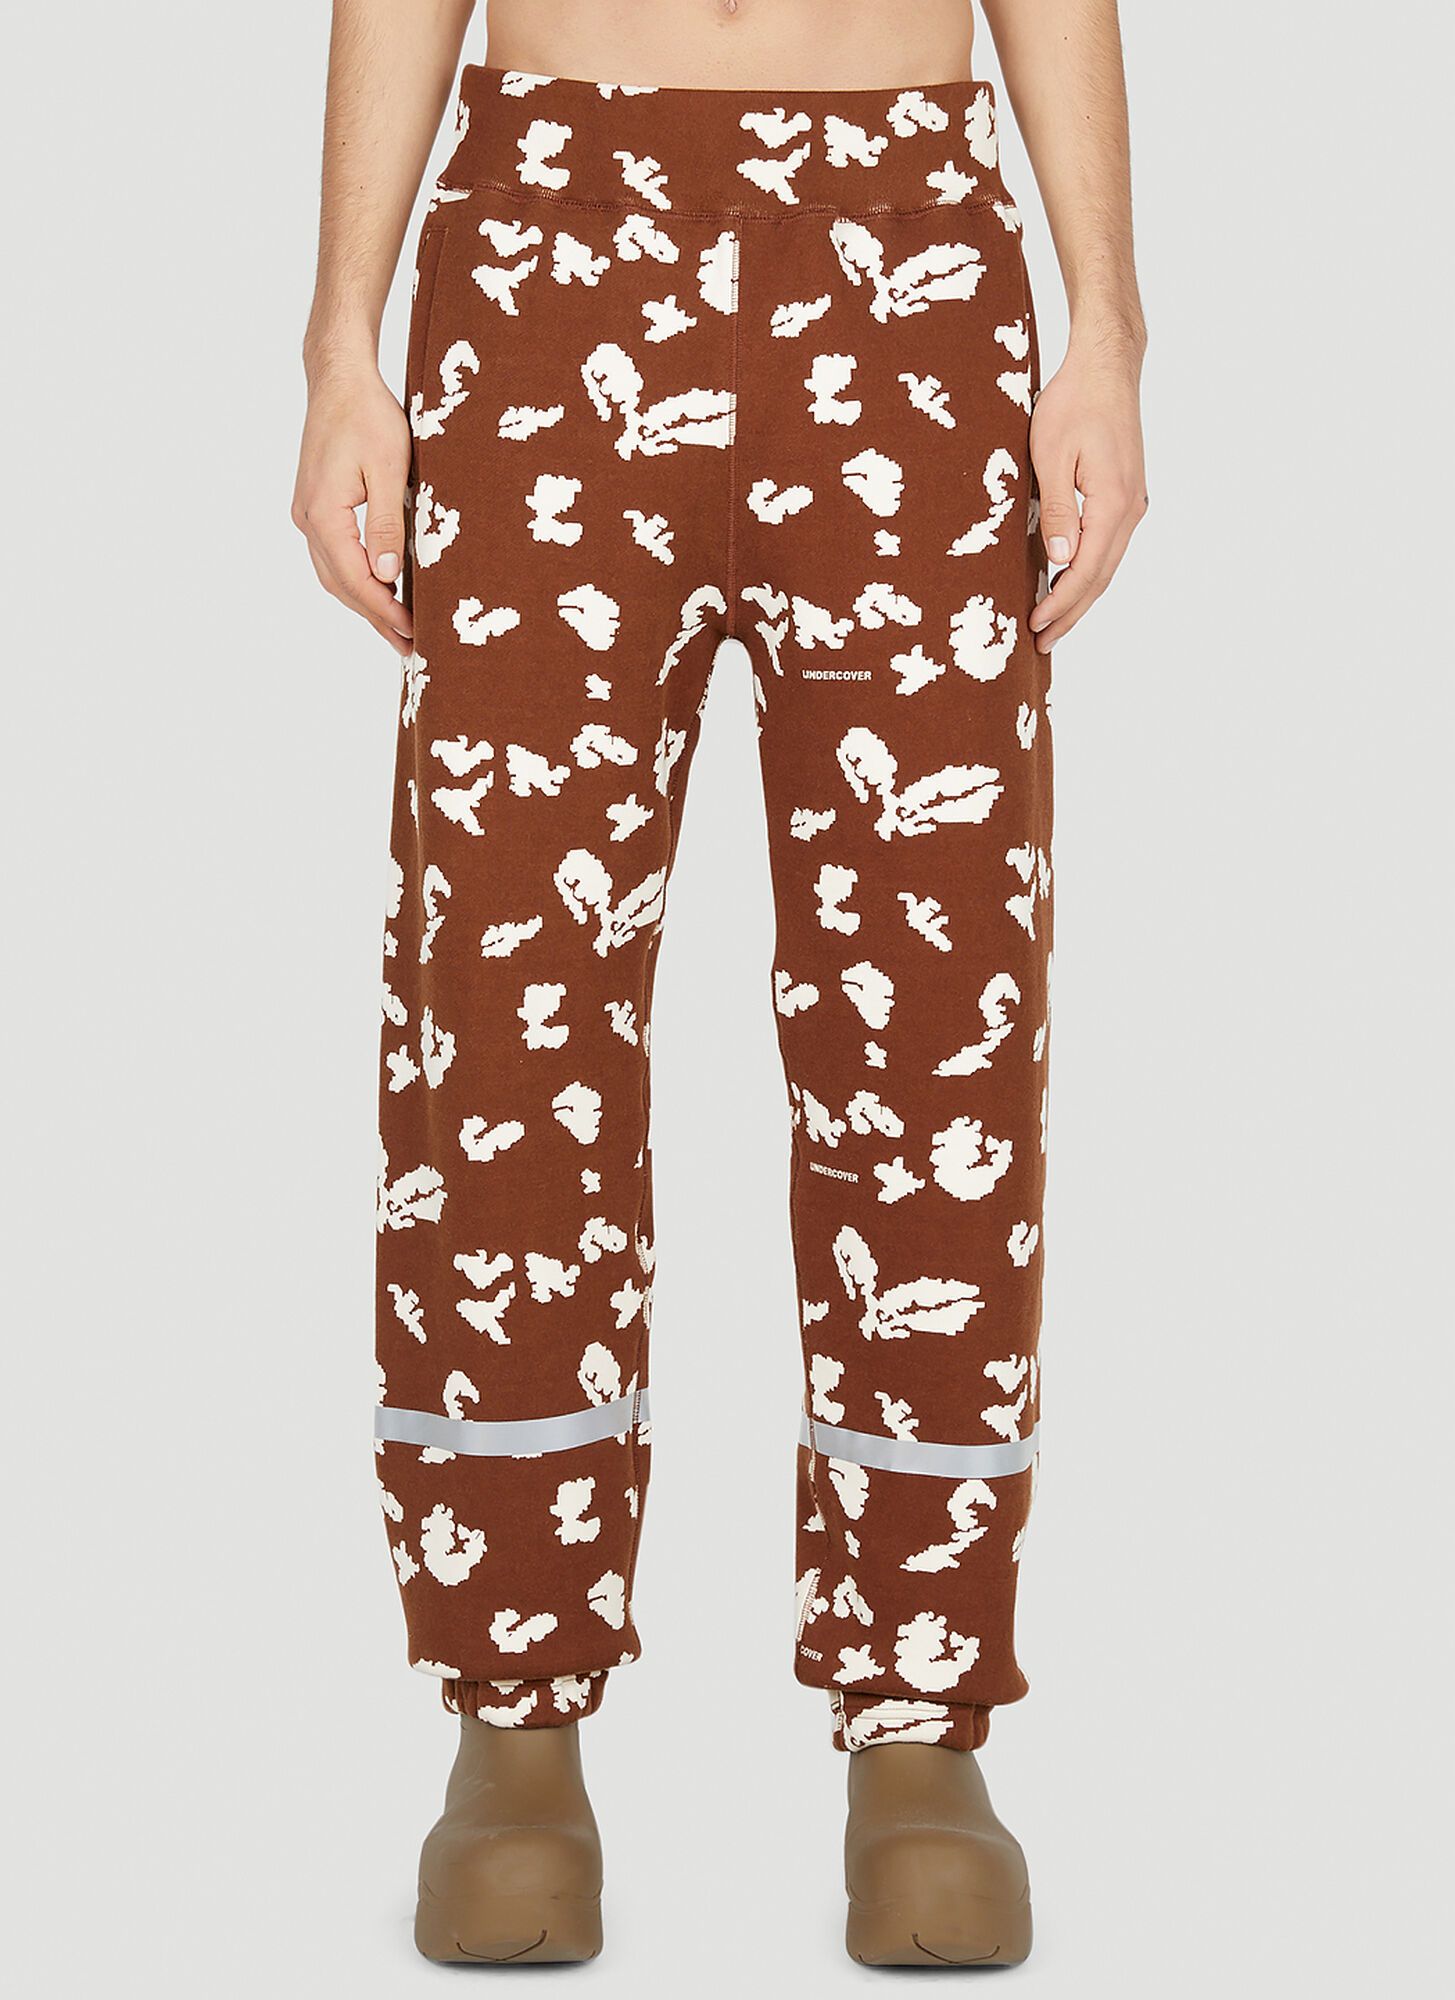 Undercover Graphic Print Track Pants Male Brown